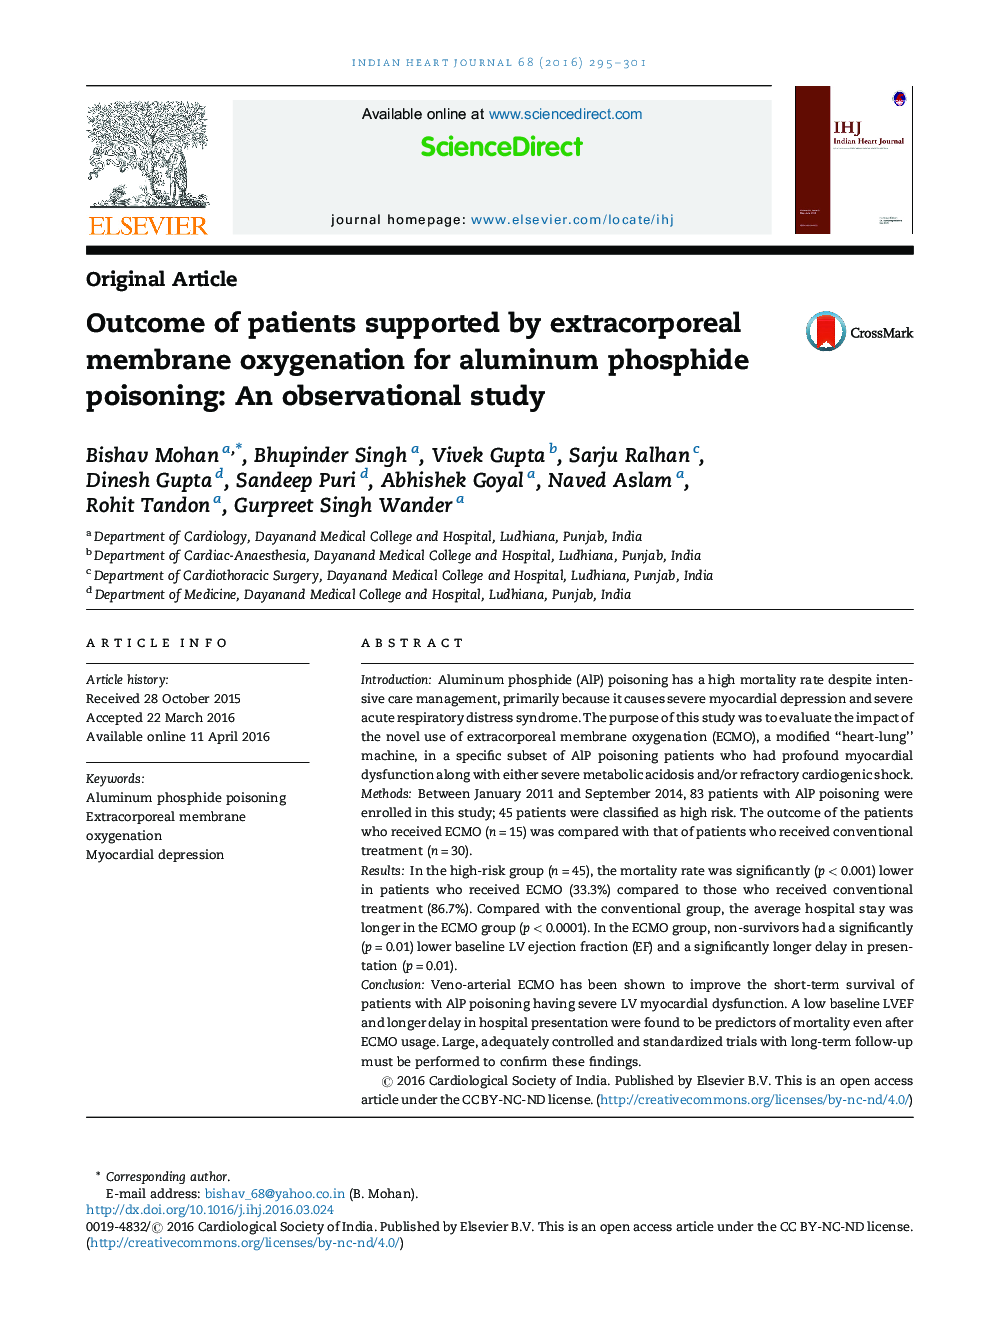 Outcome of patients supported by extracorporeal membrane oxygenation for aluminum phosphide poisoning: An observational study